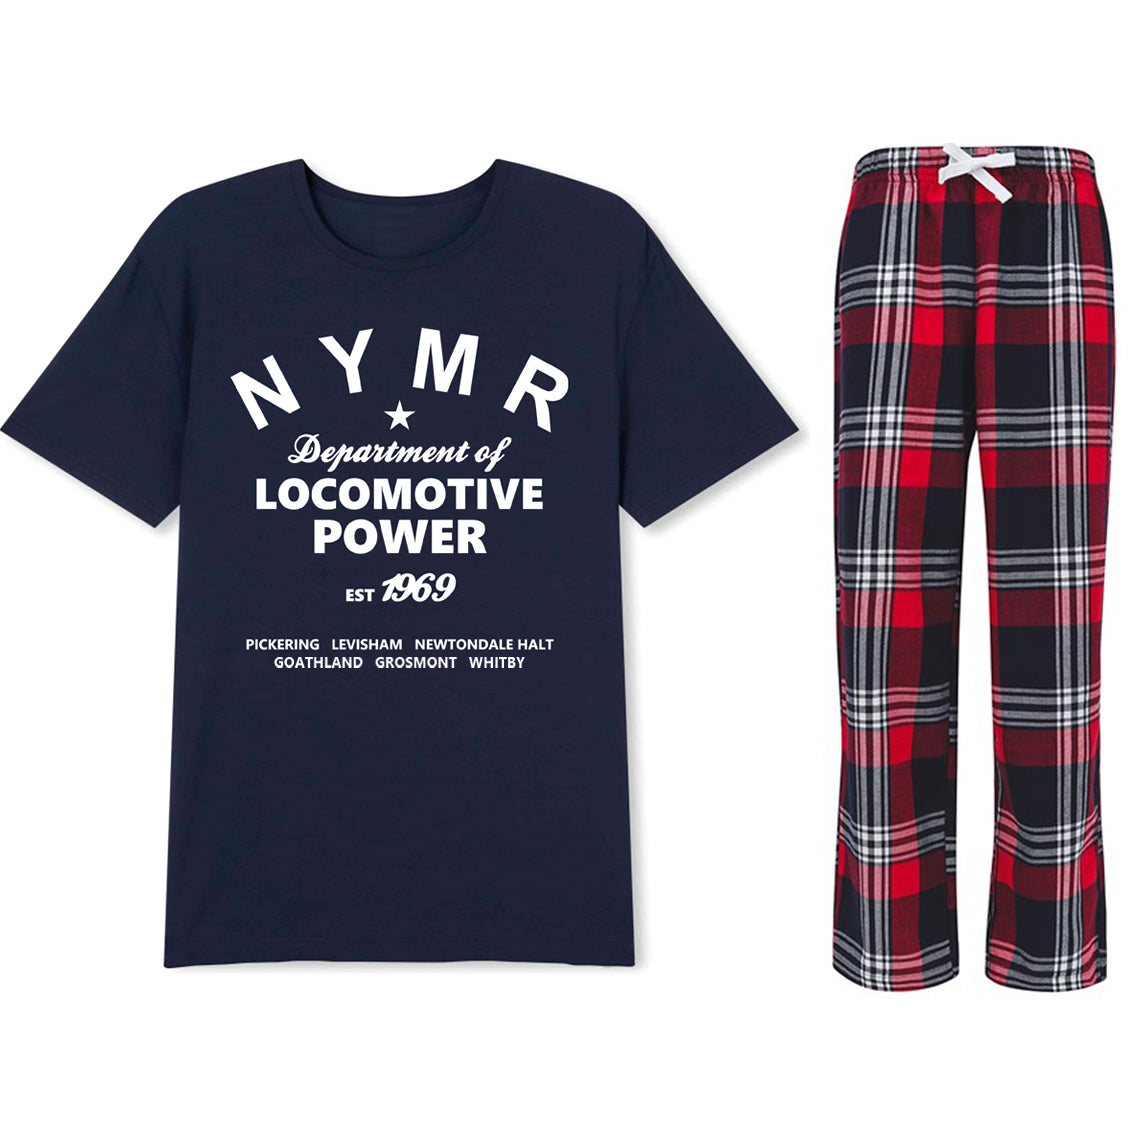 Pyjamas with navy T shirt top with white N Y M R Locomotive Power logo on front and checked tie waist trousers in red, white and blue.